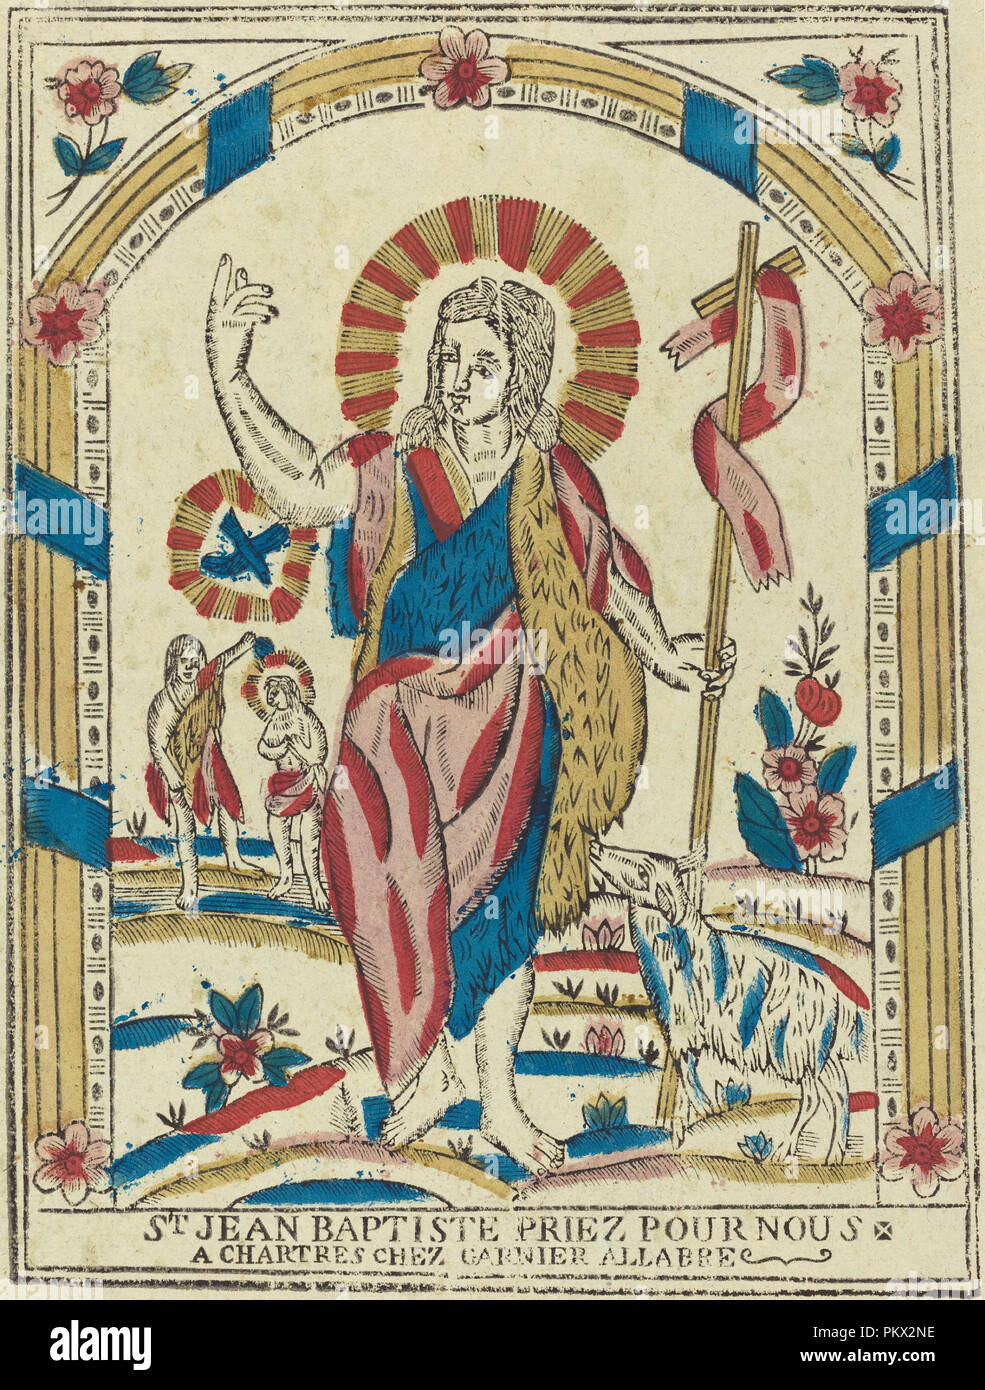 Saint John the Baptist Pray for Us. Dated: c. 1820. Dimensions: image: 34.5 x 26.1 cm (13 9/16 x 10 1/4 in.)  sheet: 39.7 x 30.2 cm (15 5/8 x 11 7/8 in.). Medium: hand-colored woodcut on blue laid paper. Museum: National Gallery of Art, Washington DC. Author: French 19th Century. Stock Photo